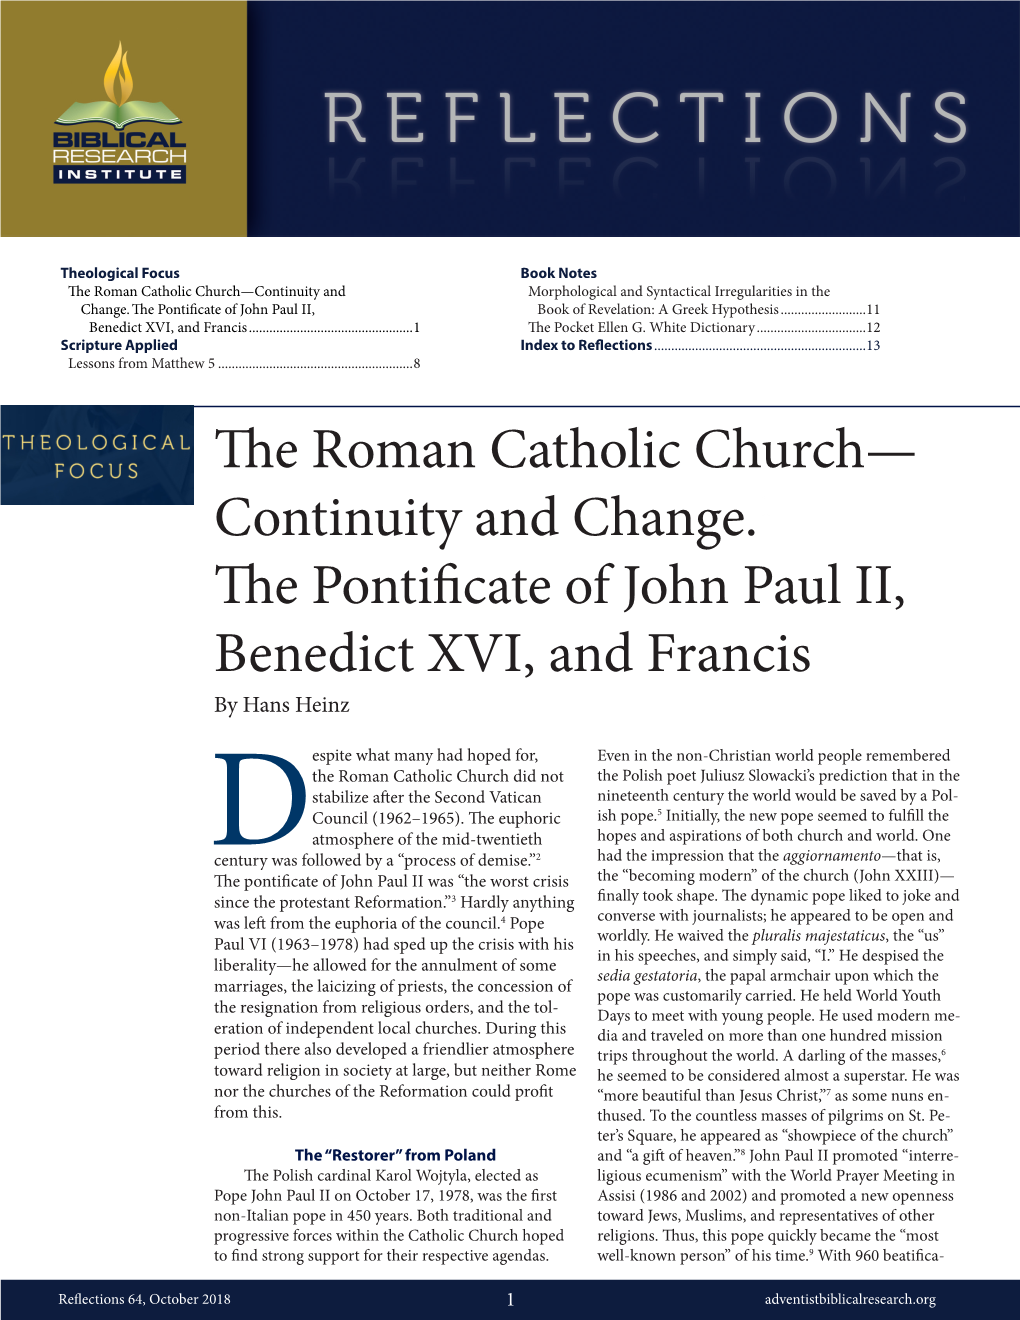 The Roman Catholic Church— Continuity and Change.1 the Pontificate of John Paul II, Benedict XVI, and Francis by Hans Heinz